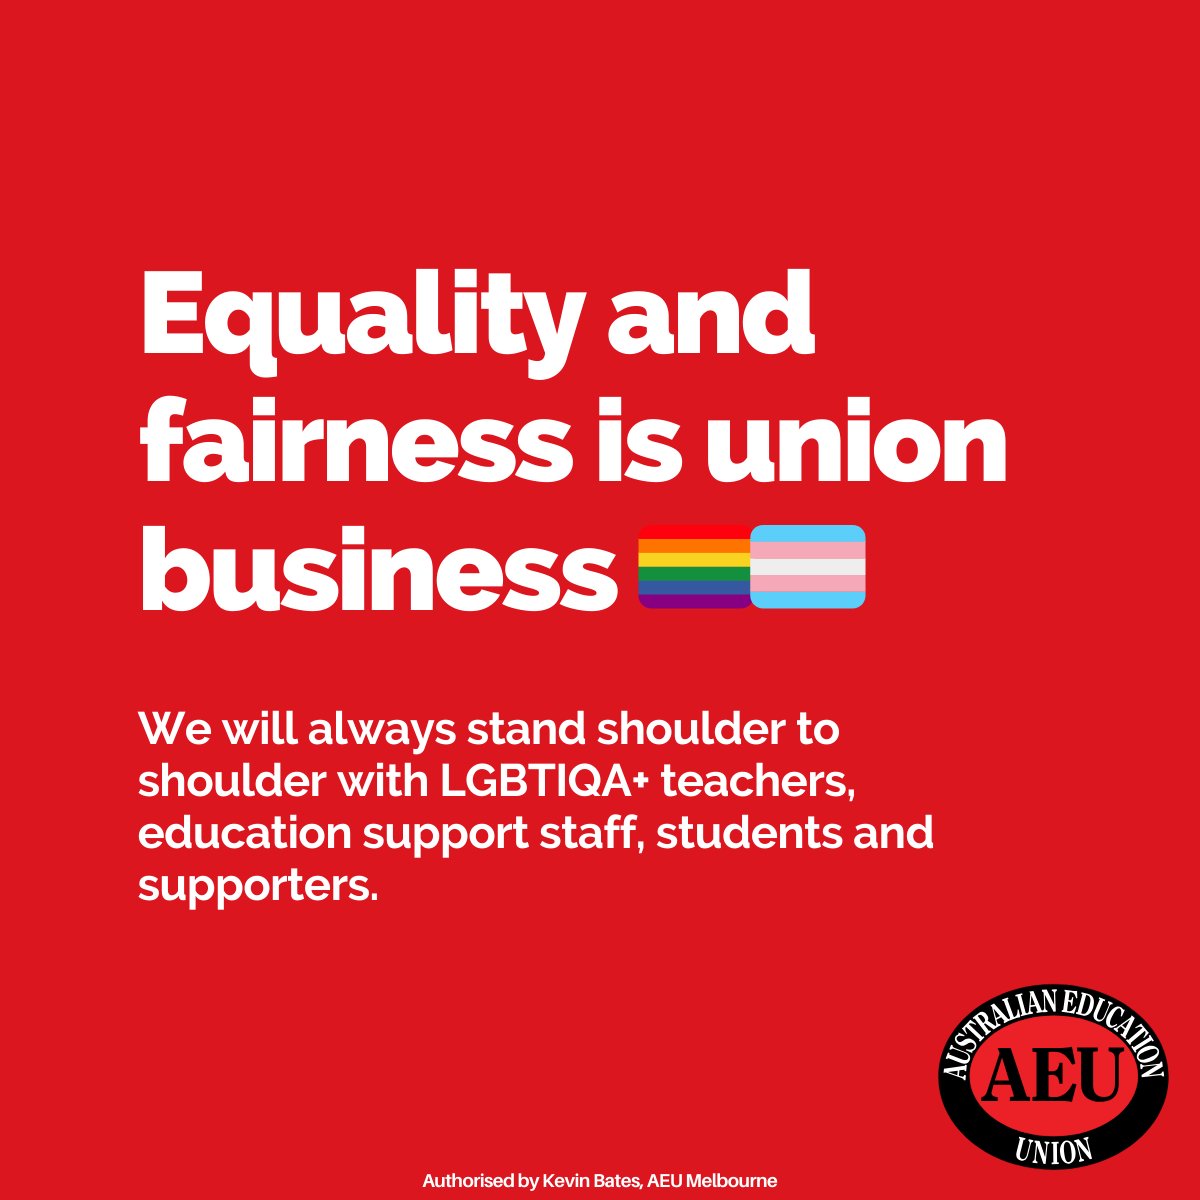 🧵 The AEU stands proudly with all our members, and today we want to acknowledge our LGBTIQA+ members and supporters. For teachers and education support staff, being ‘out’ at work can come with risk, especially now when gender identity is under attack.